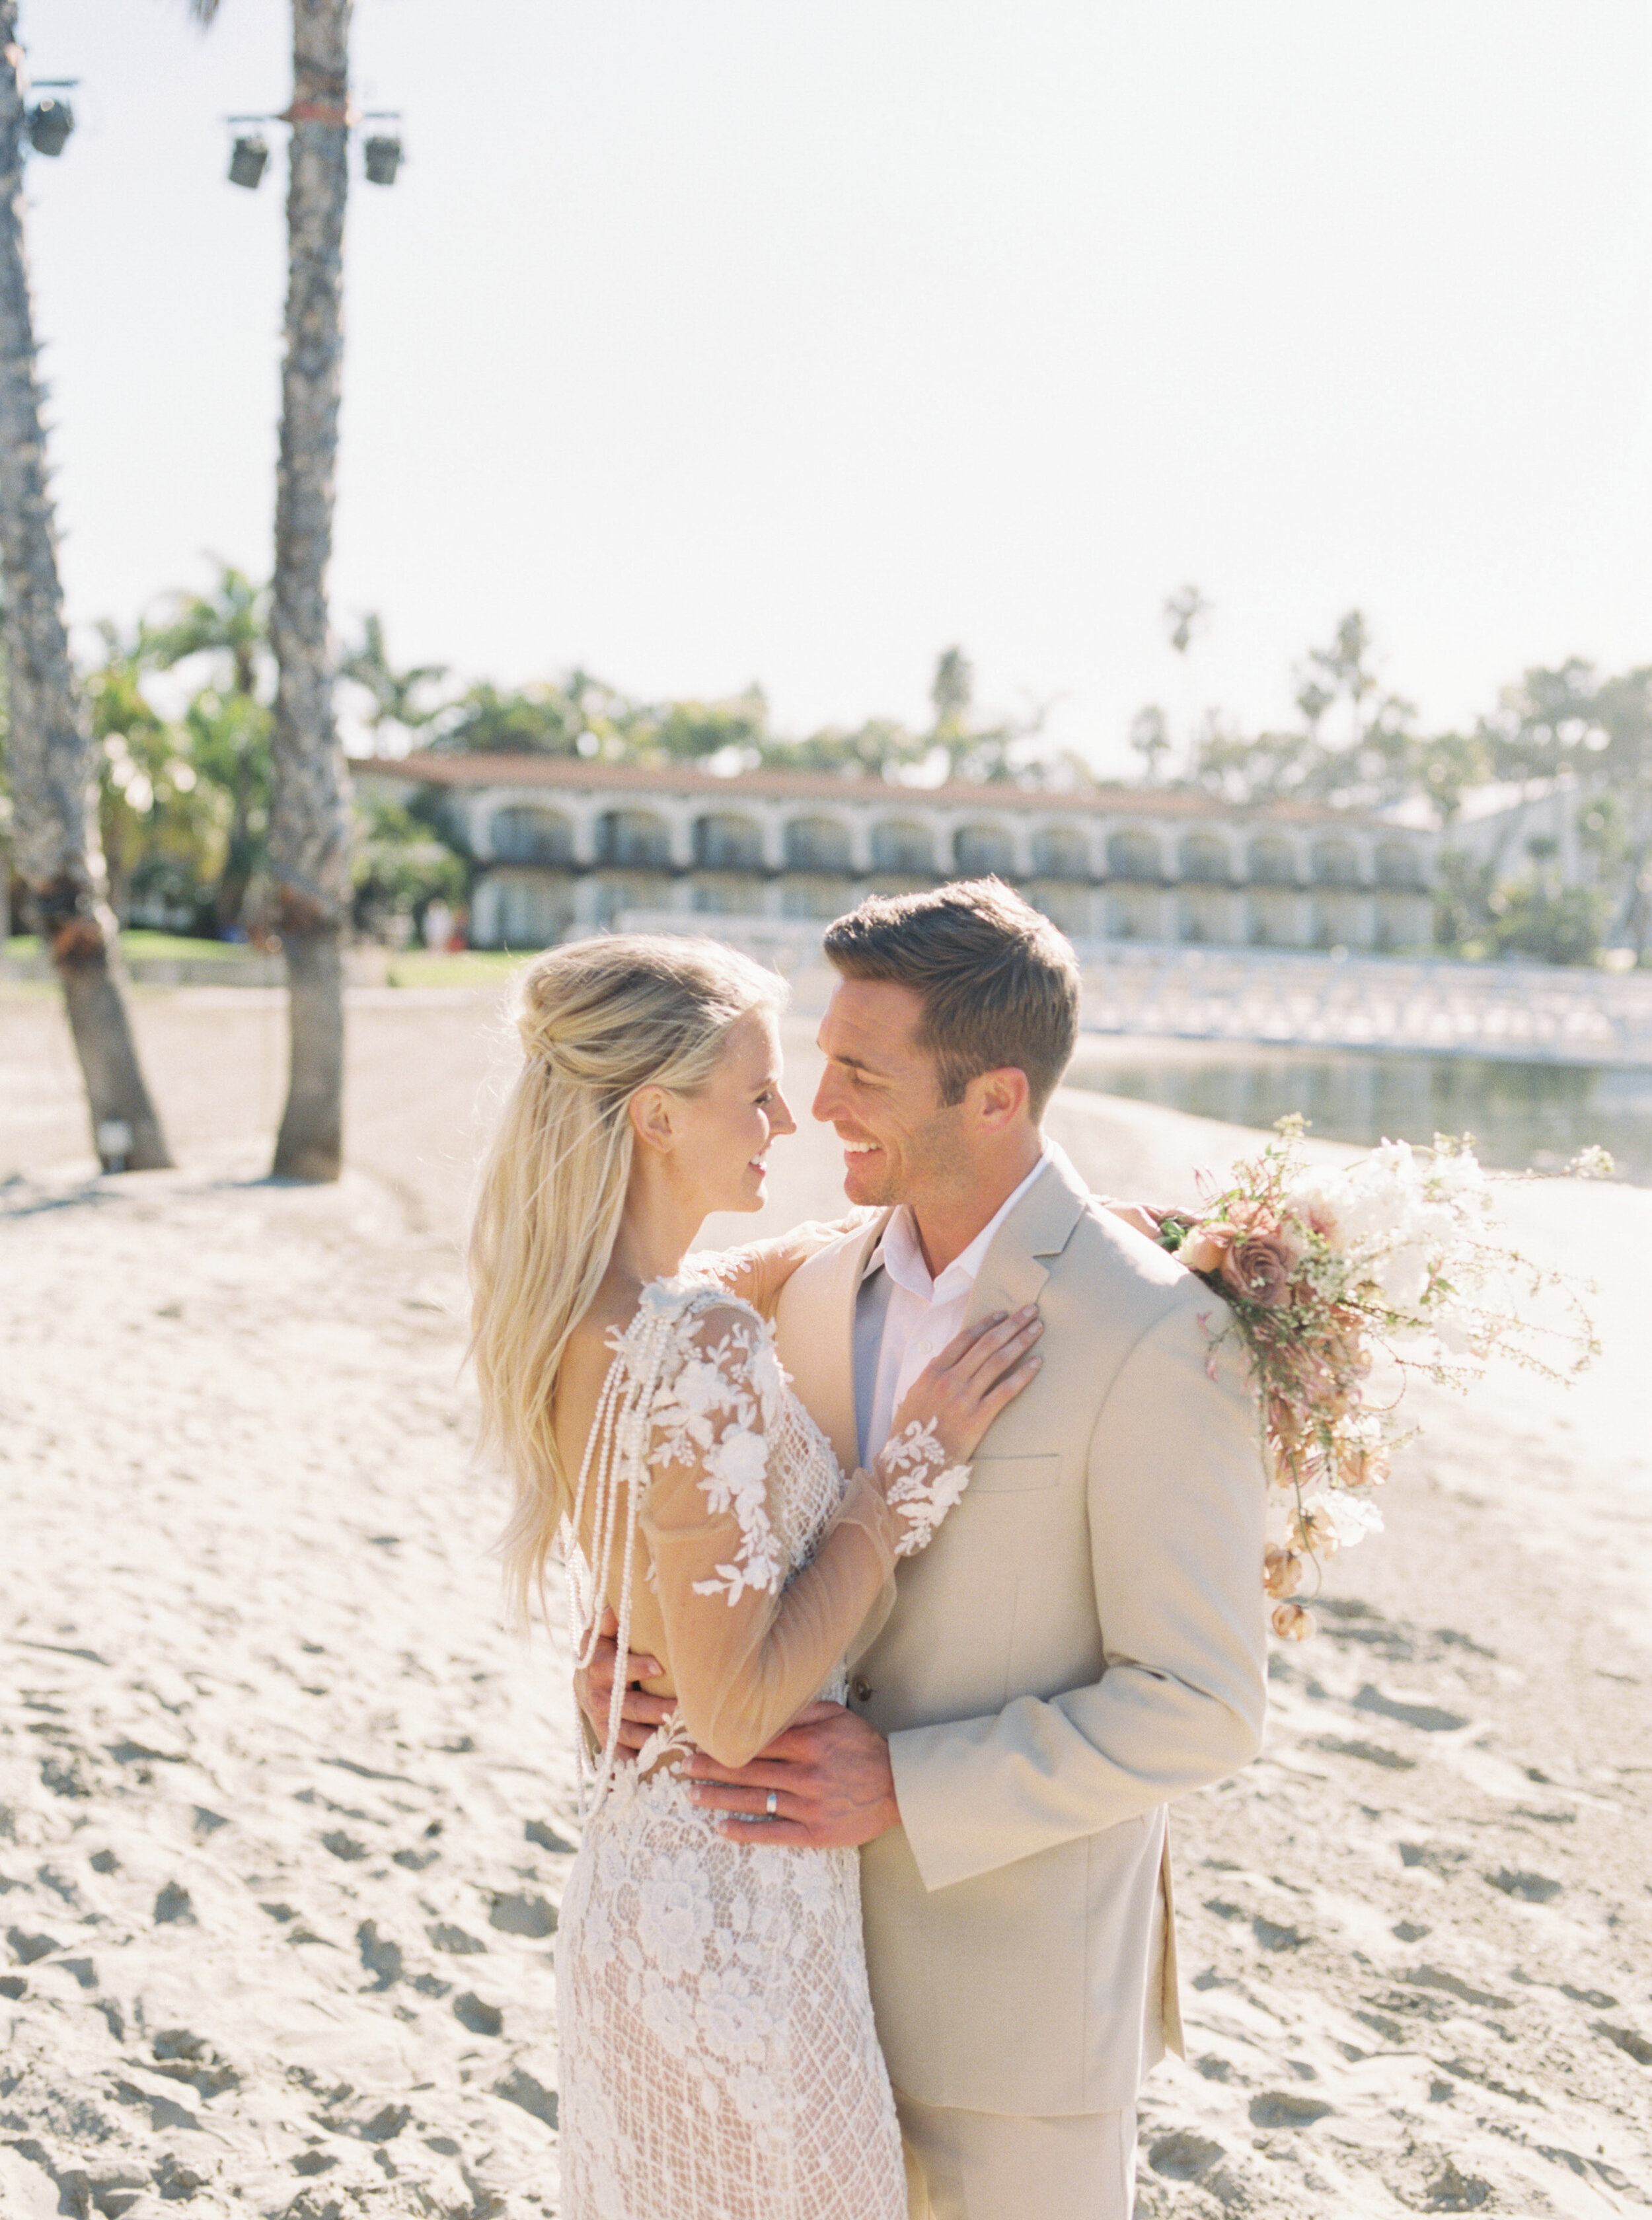 Refined and elegant destination fine art wedding on the beach in San Diego, California with Galia Lahav gown by Liz Andolina Photography